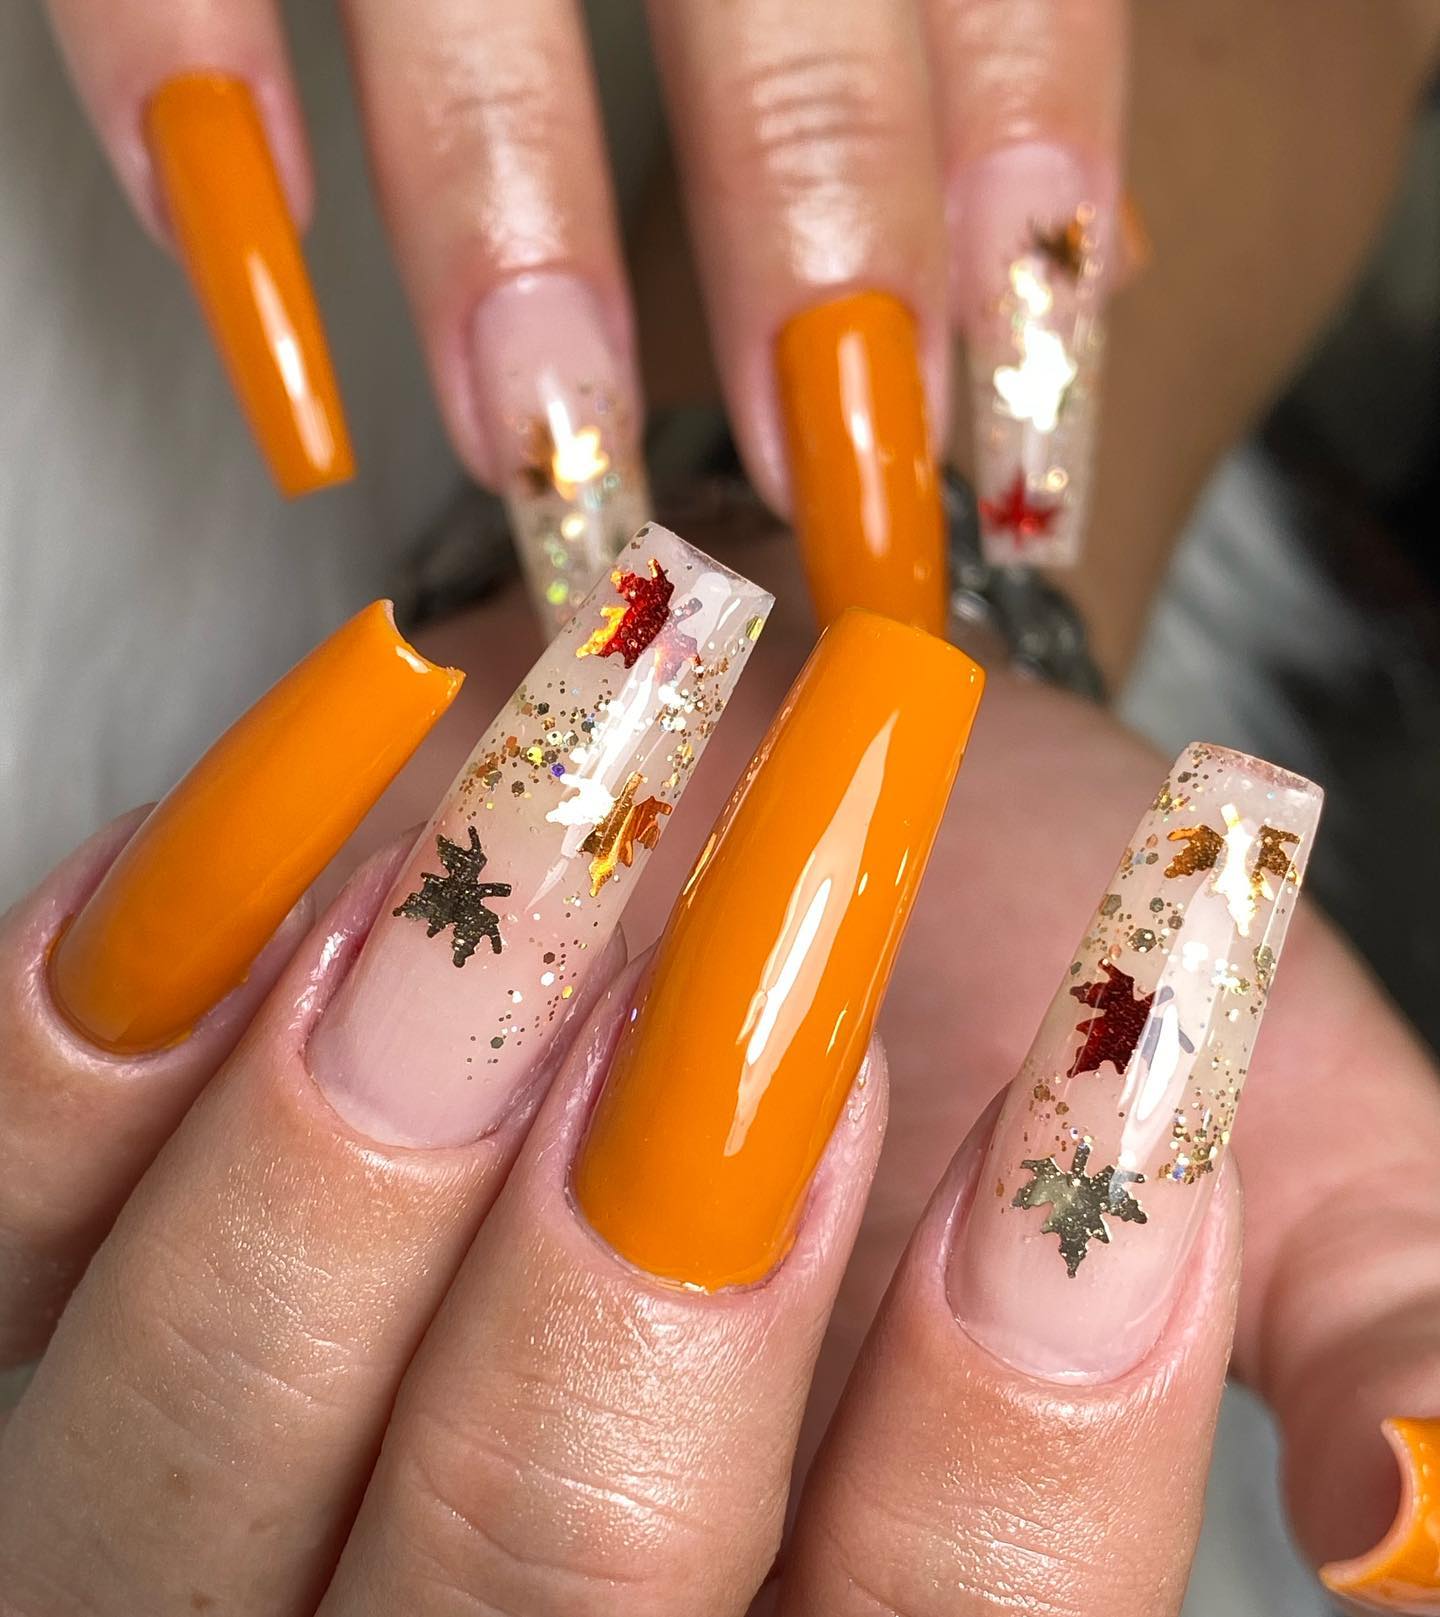 There's just something so cool about having a nail design that is only appropriate for a certain season! It makes people feel like they have their finger on the pulse of time, and that they are taking part in something special.